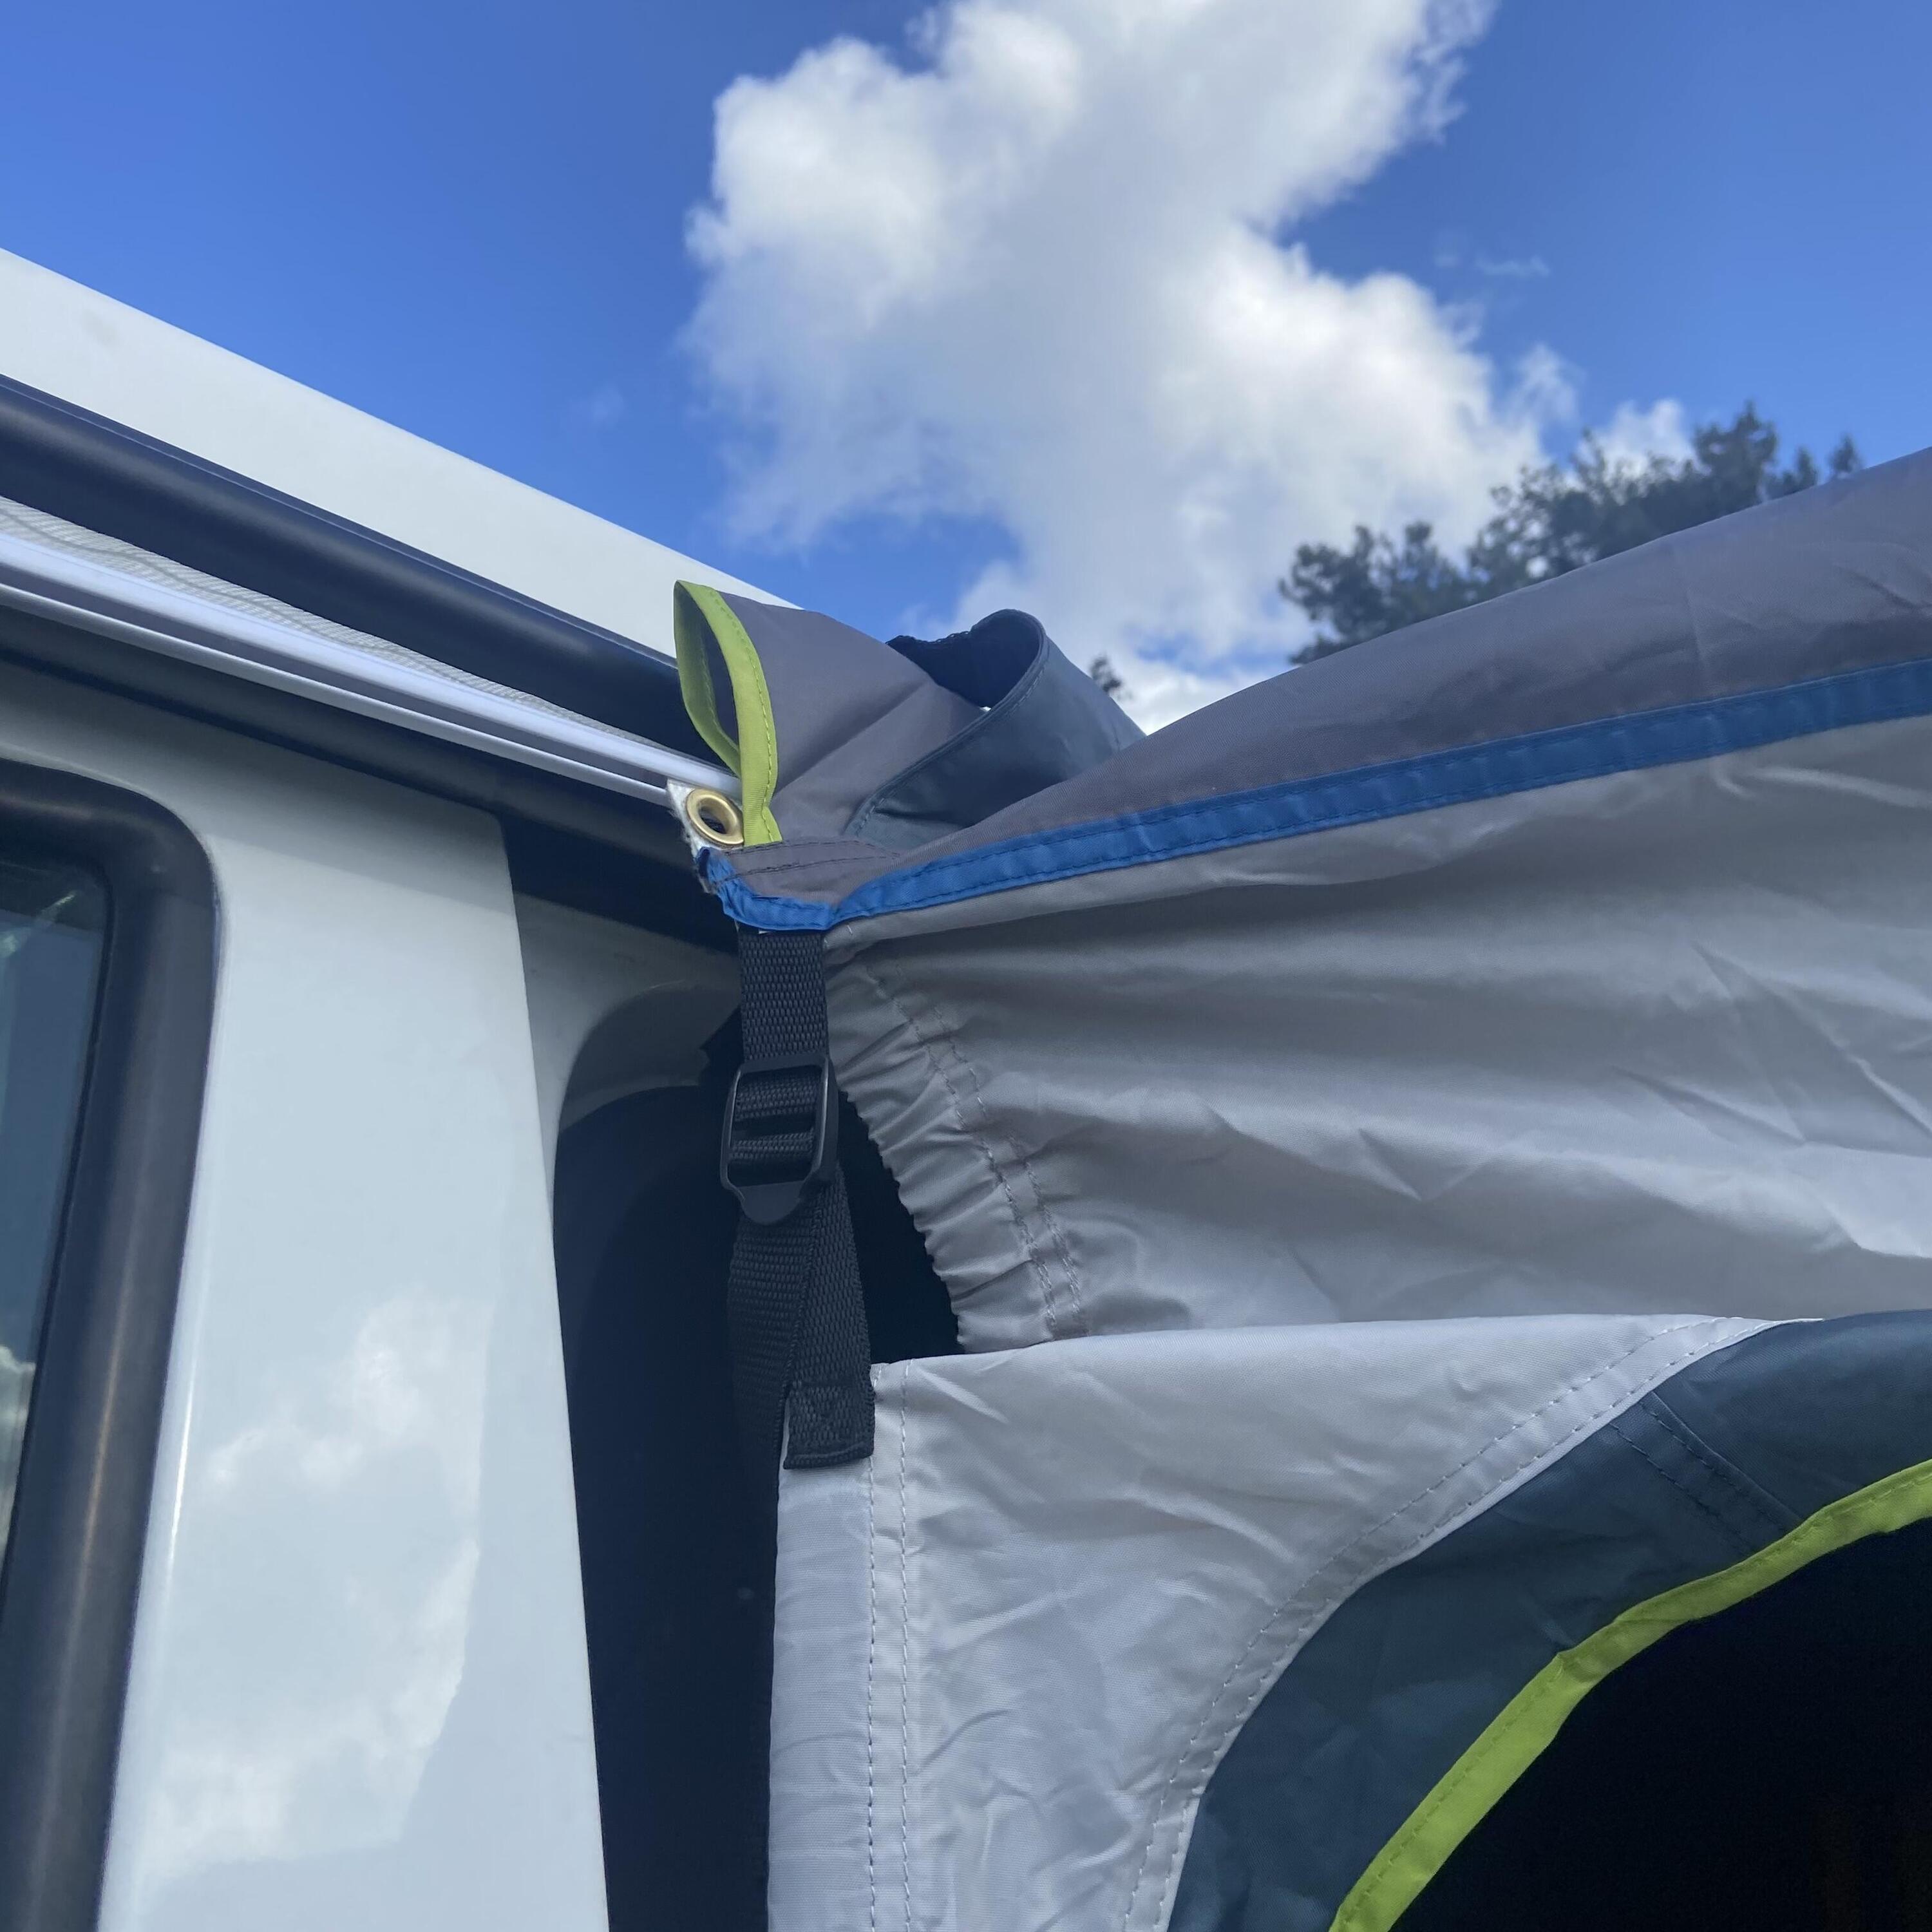 OLPRO Hive Breeze - Inflatable Campervan Awning (With Sleeping Pod) 6/7